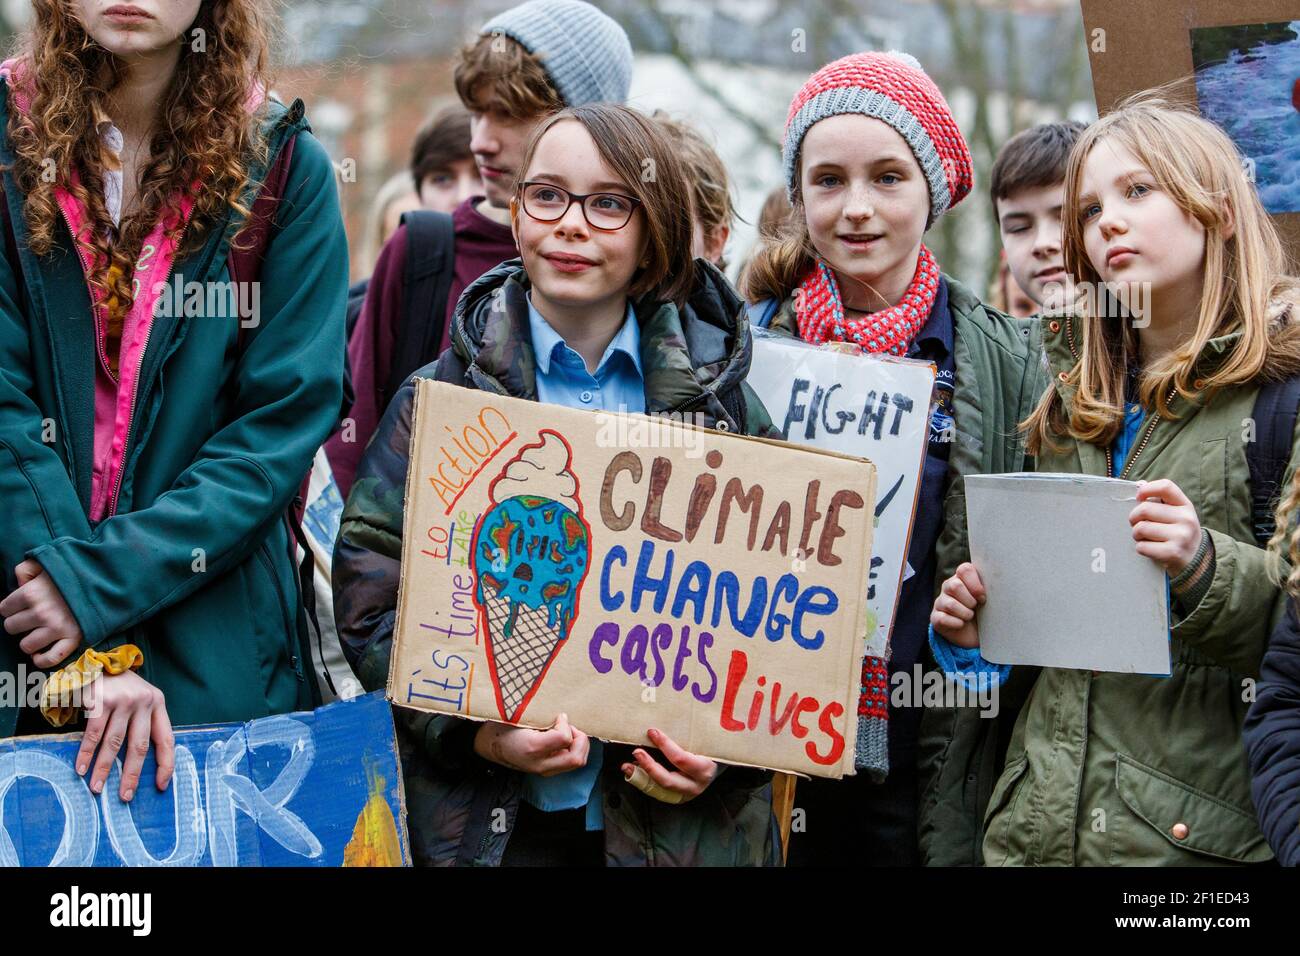 Bristol college student protesters and school children are pictured taking part in a Youth Strike 4 Climate change protest march in Bristol 14-02-20 Stock Photo